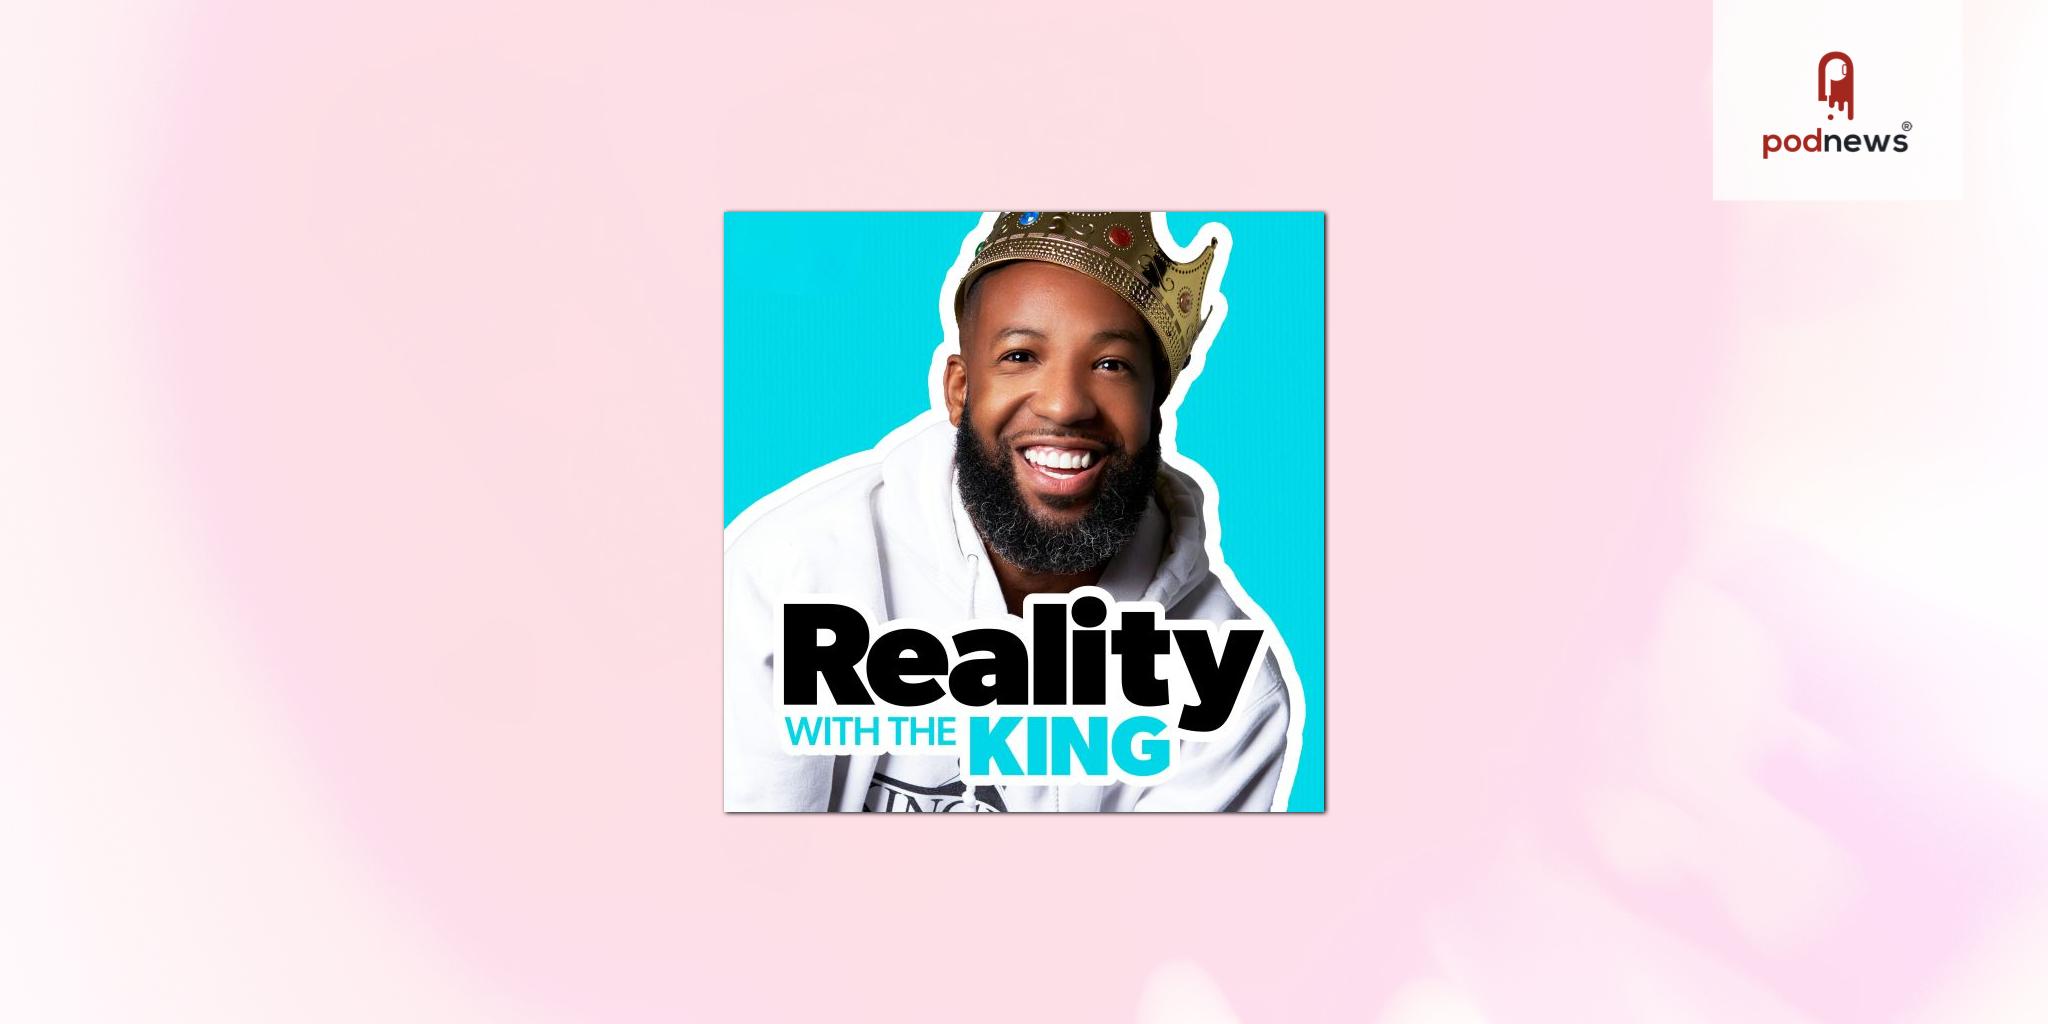 SiriusXM's Stitcher signs Carlos King to launch original podcast series Reality with the King on More Sauce